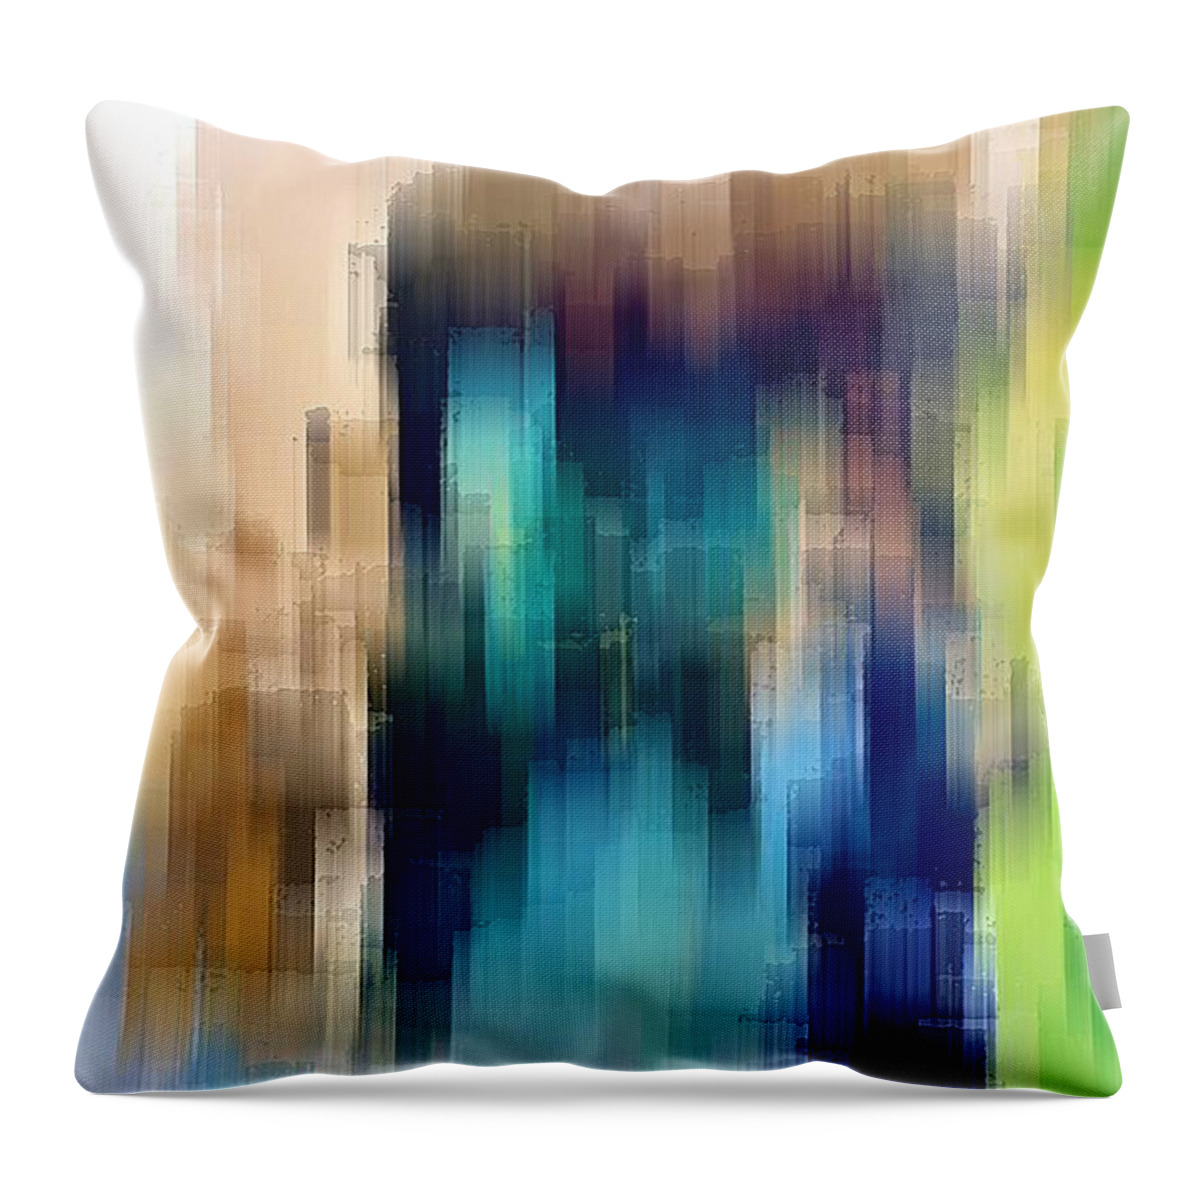 Digital Throw Pillow featuring the digital art The Bystander by David Manlove